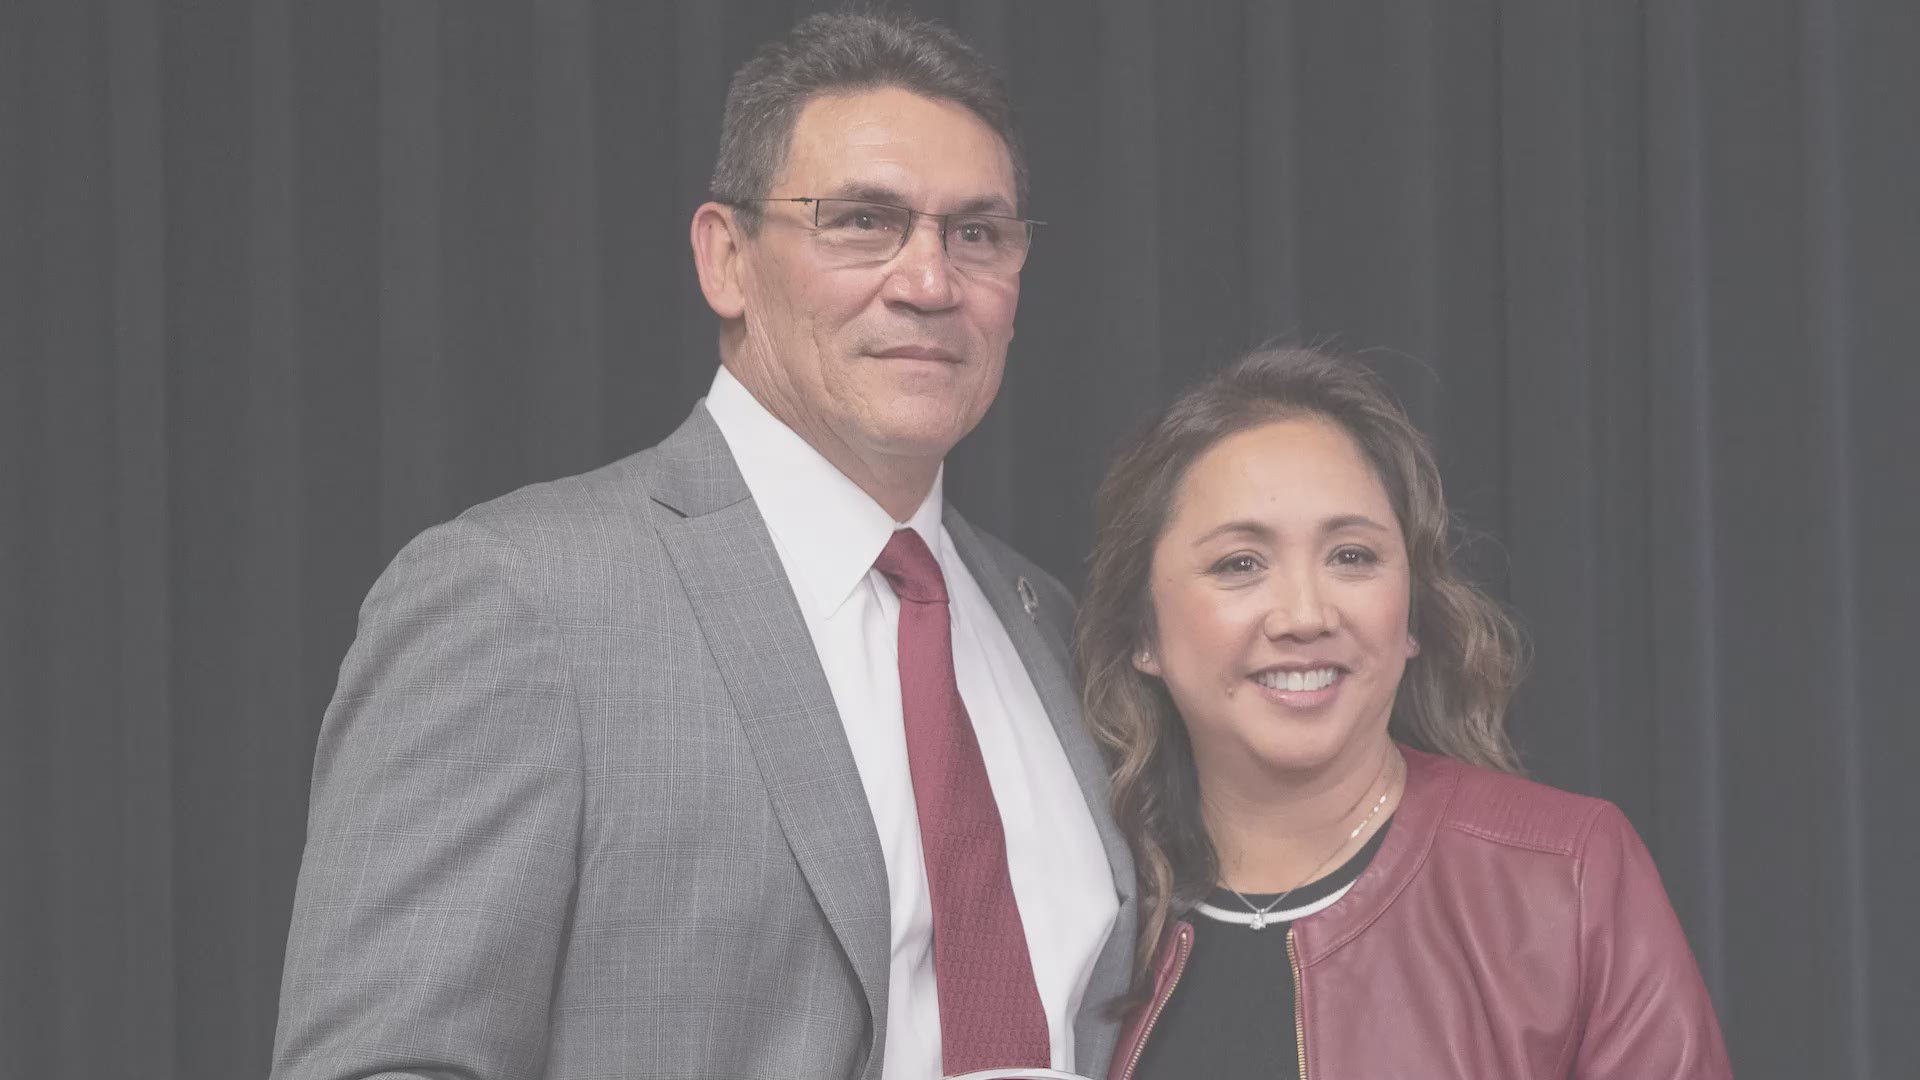 Stephanie and Ron Rivera have been through a lot in 2020. But she's optimistic about the future.